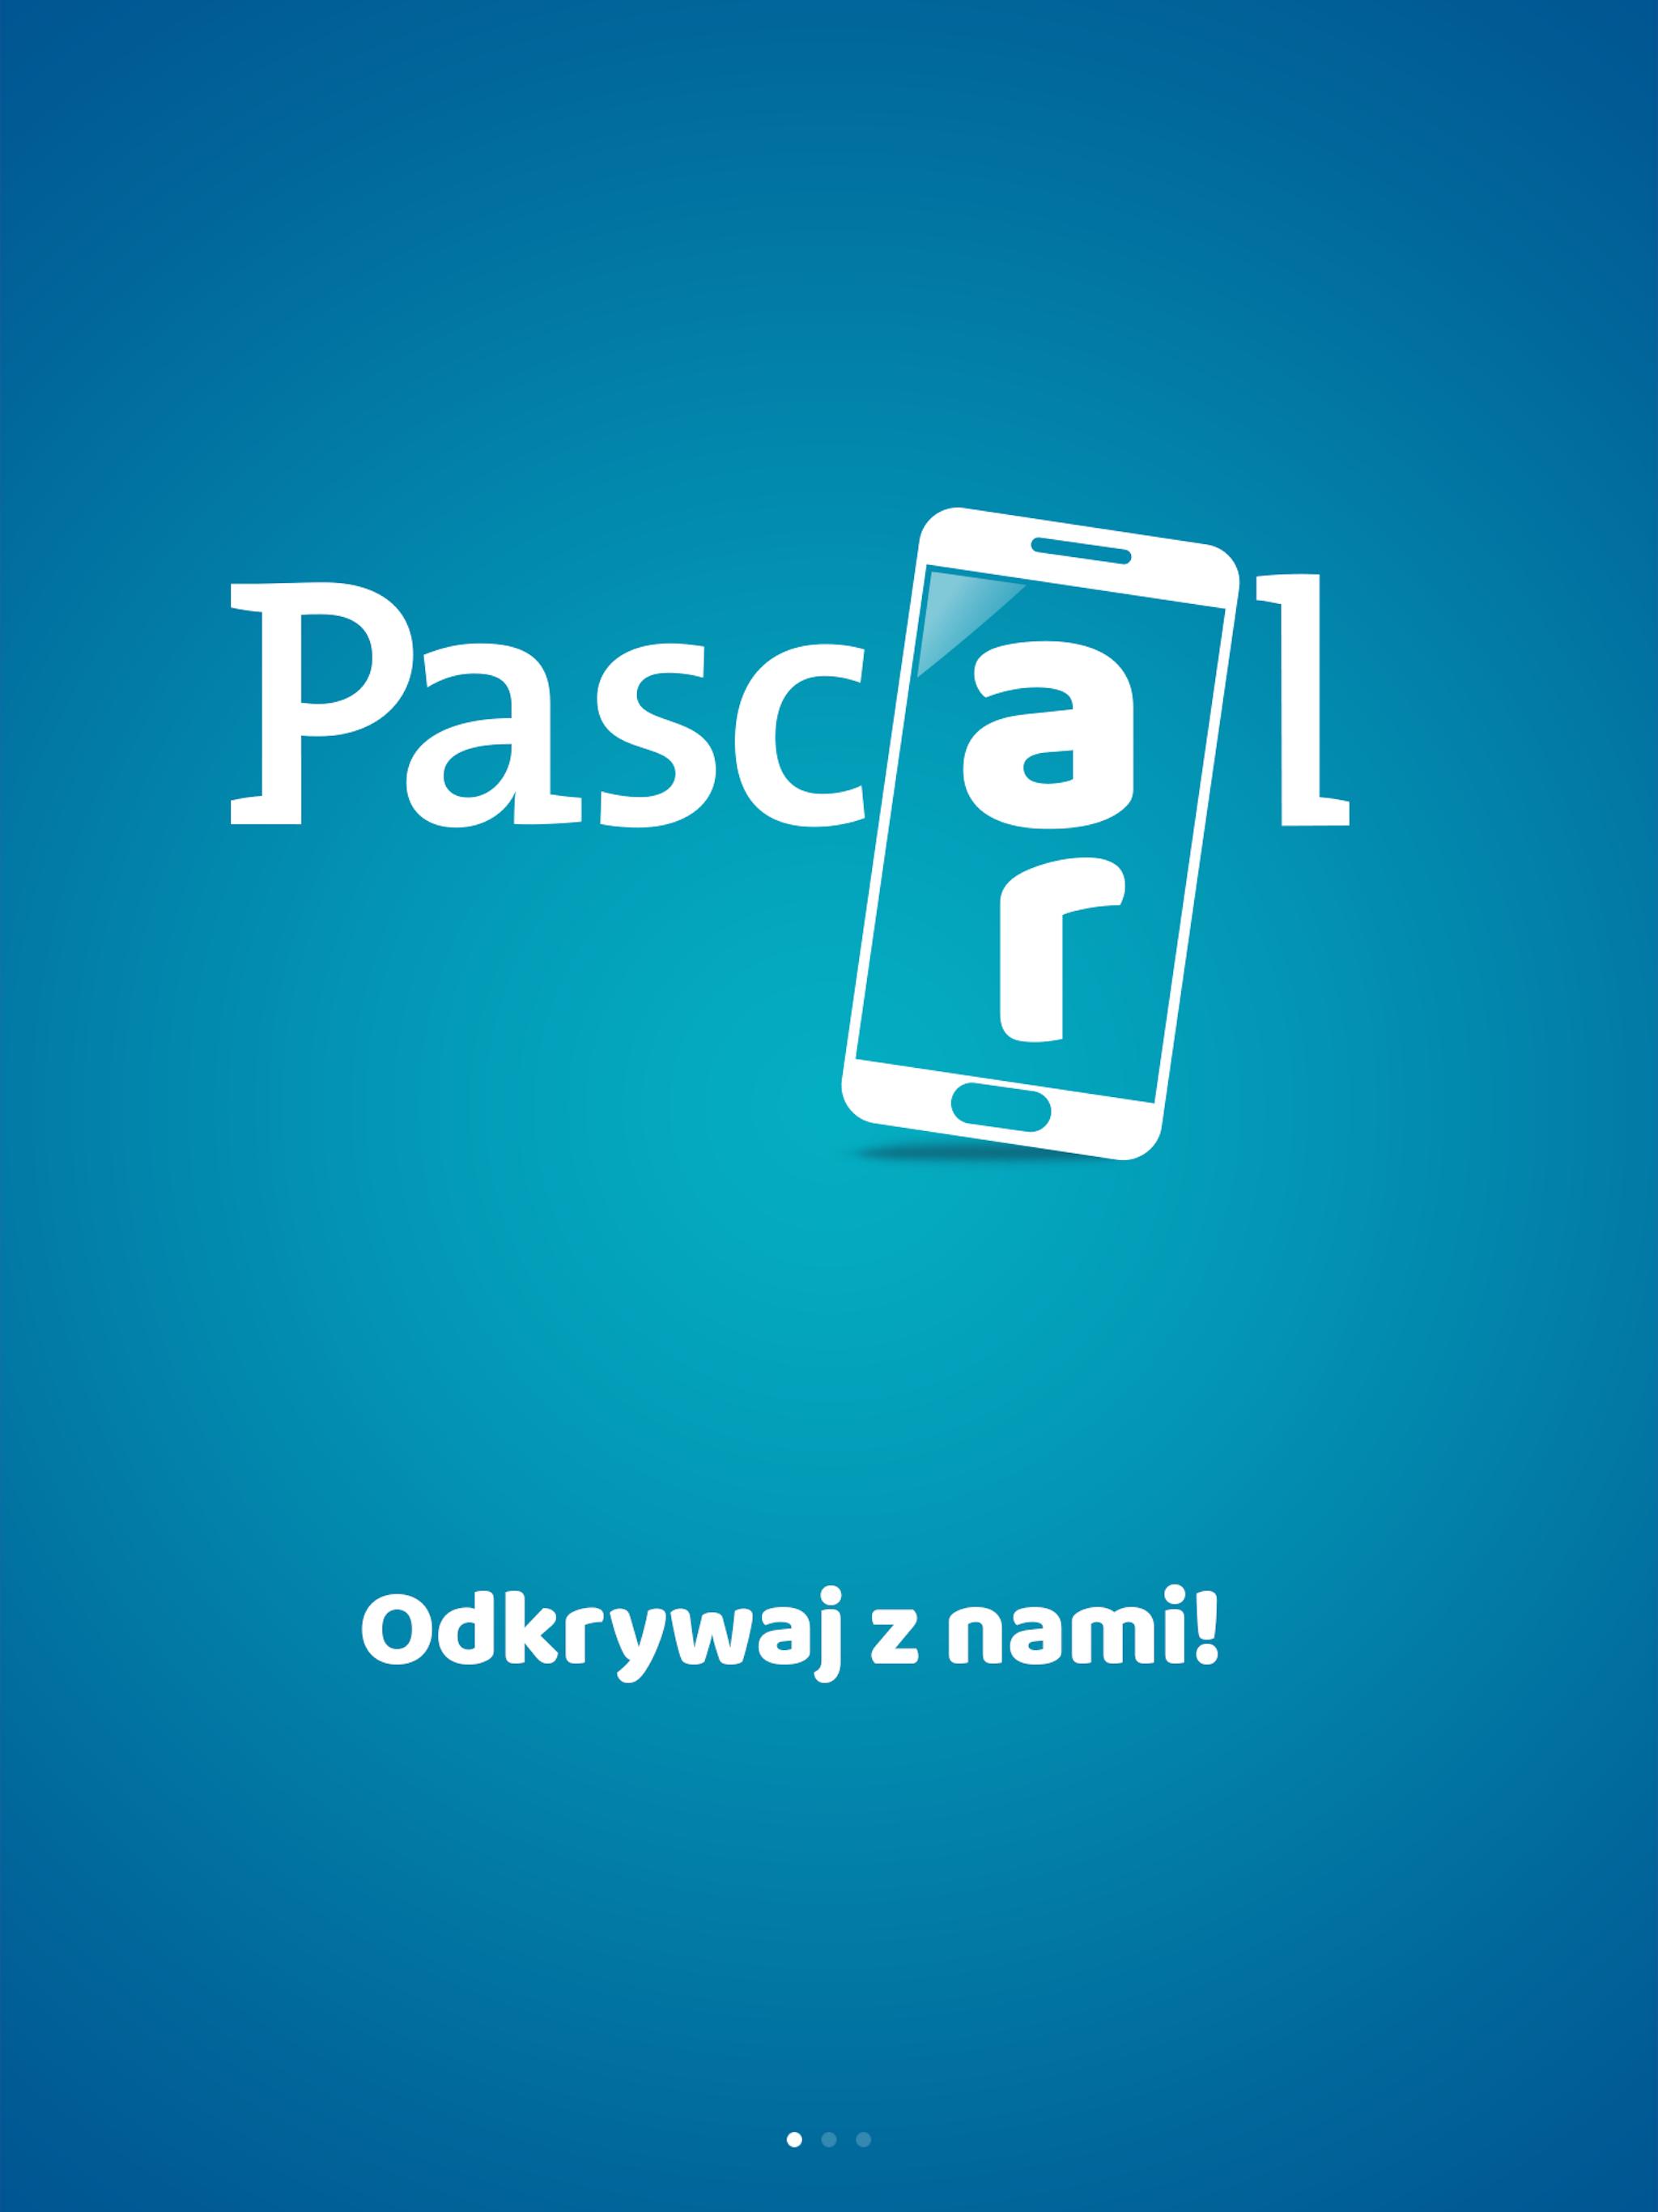 Download Pascal on Android. Pascal android